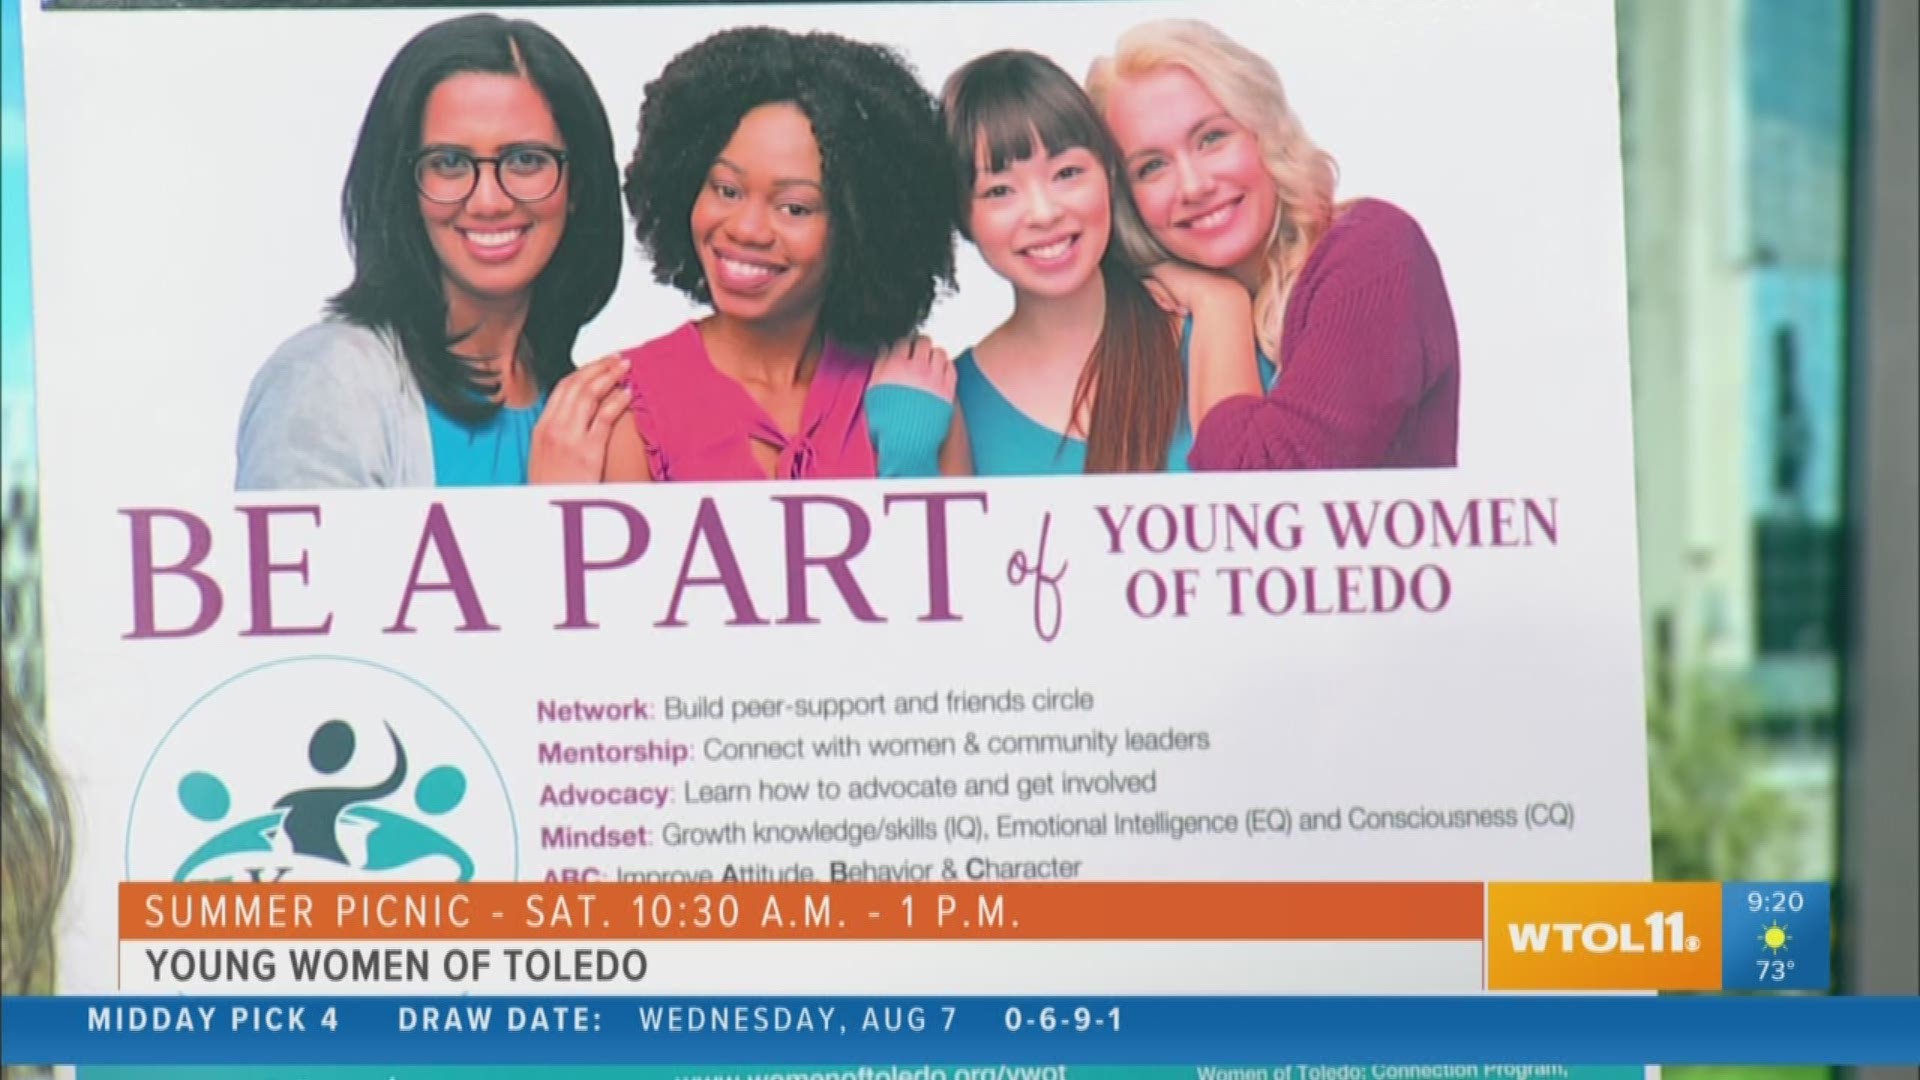 Young ladies ages 15 to 26, you're invited to the Young Woman of Toledo Summer Picnic!